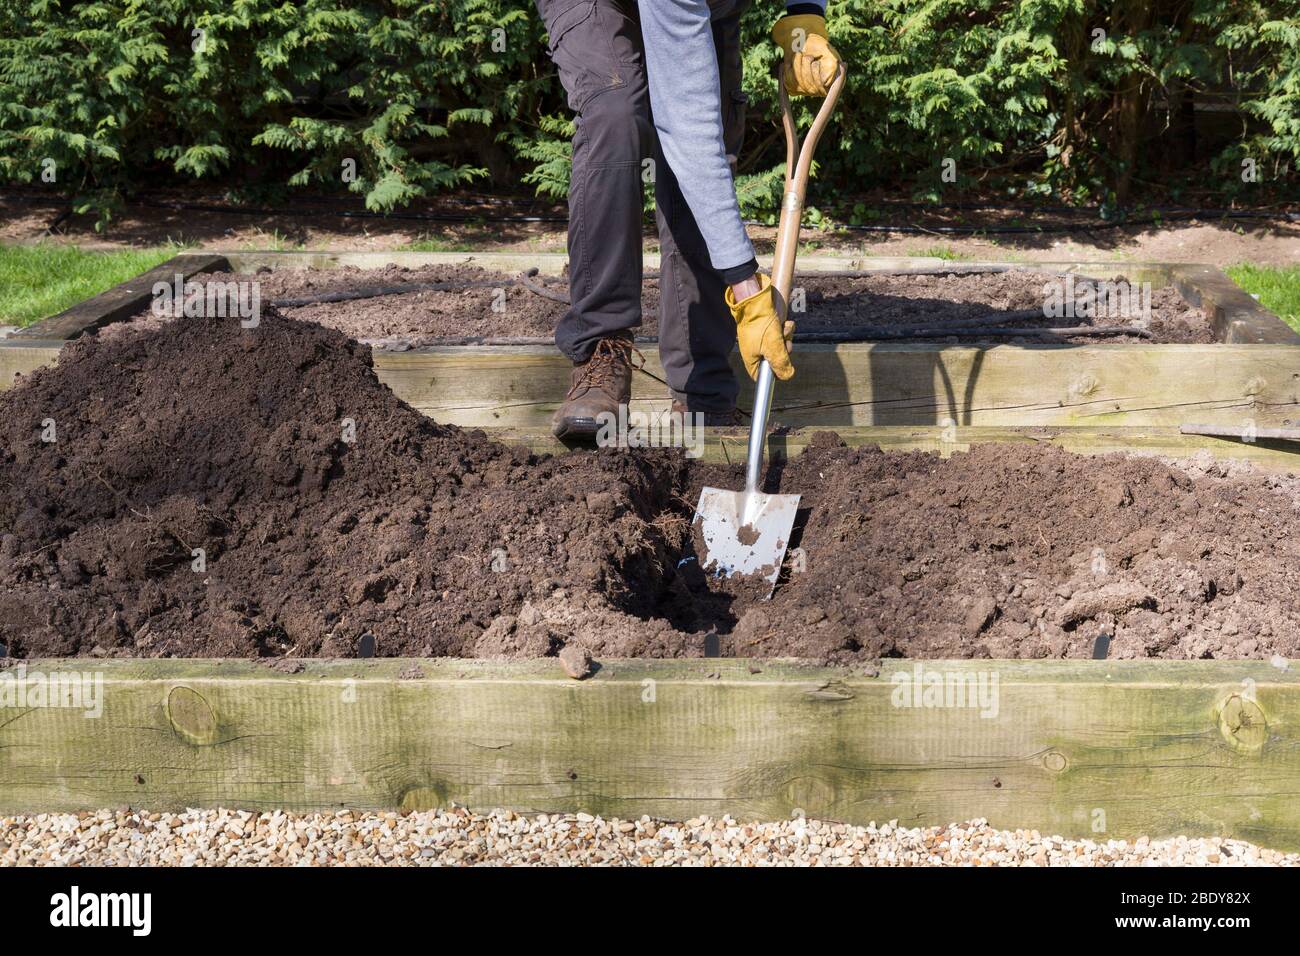 Man, male gardener digging a hole with a shovel in a vegetable garden, UK Stock Photo